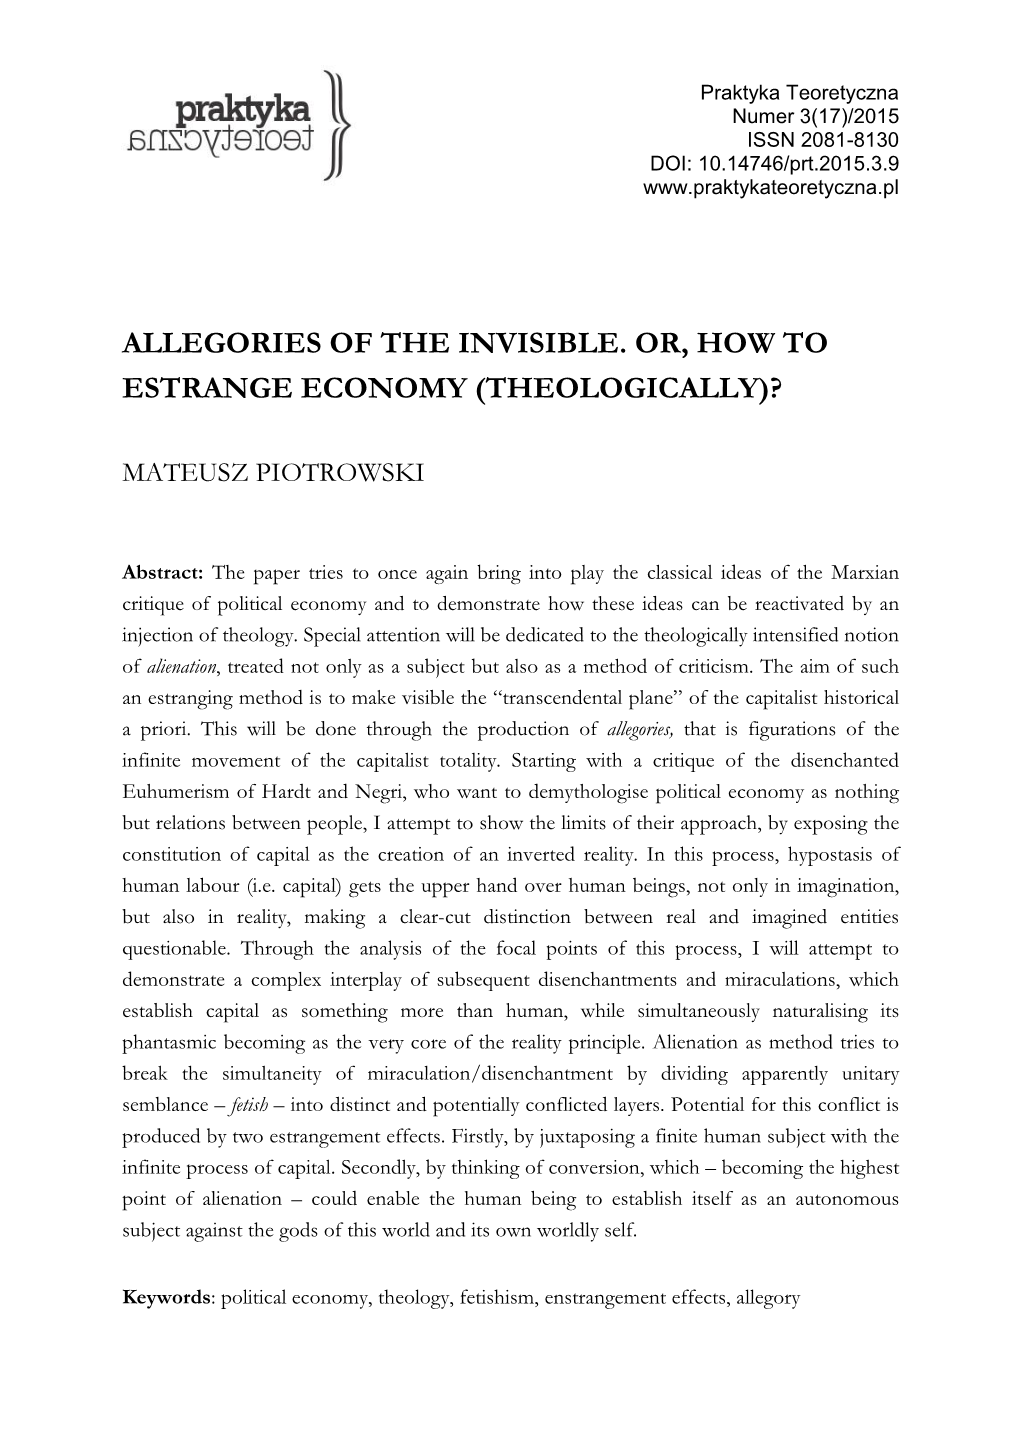 Allegories of the Invisible. Or, How to Estrange Economy (Theologically)?